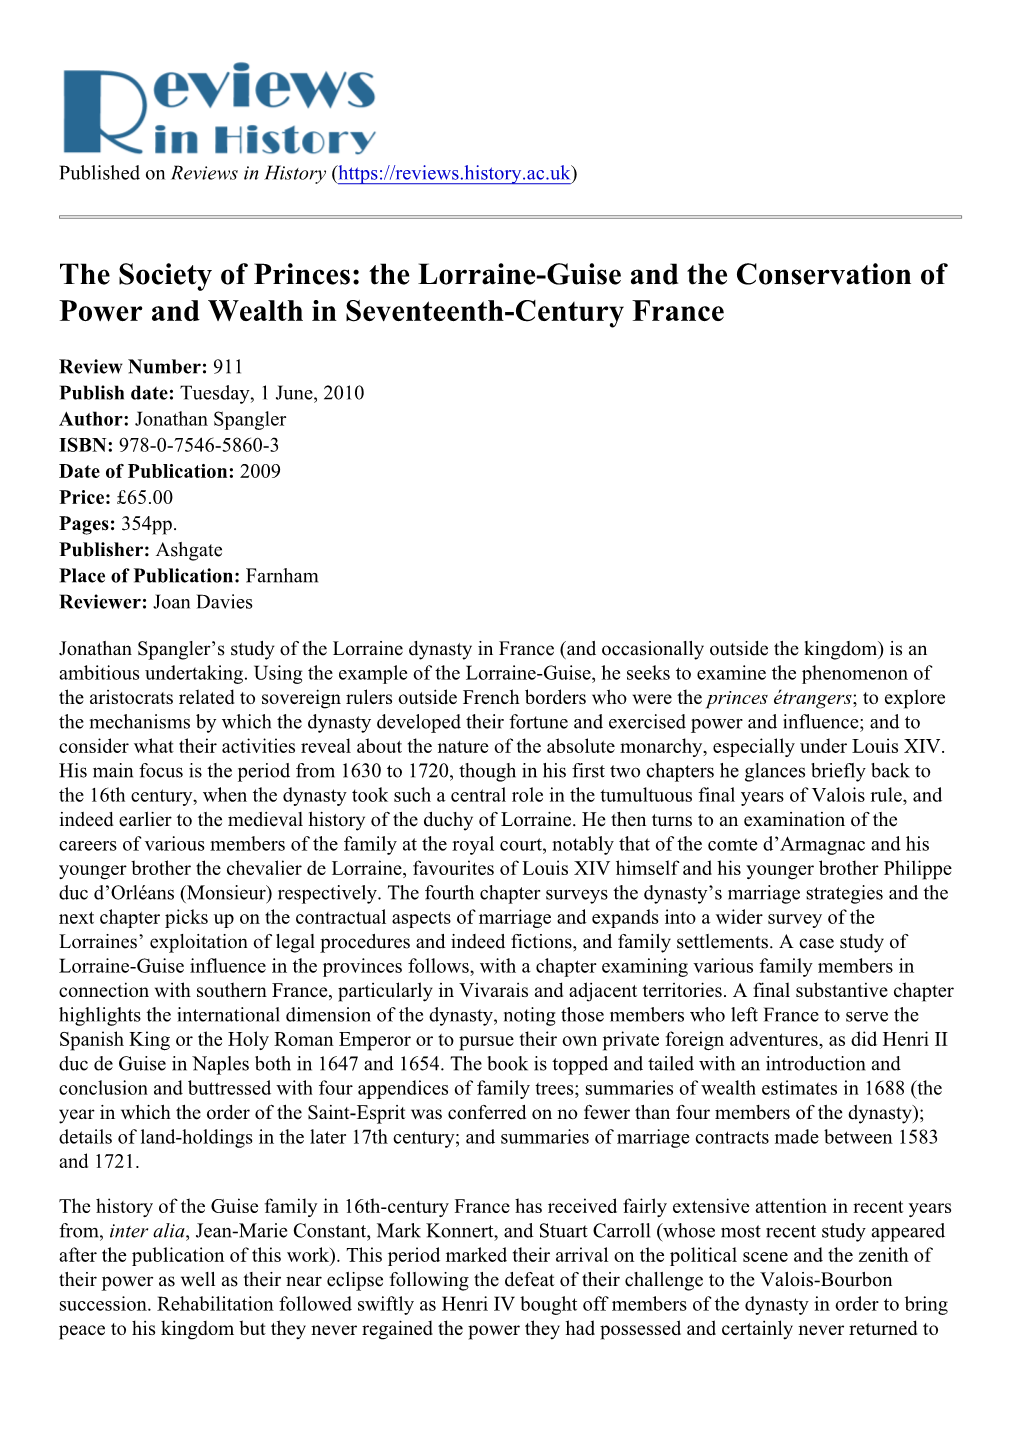 The Society of Princes: the Lorraine-Guise and the Conservation of Power and Wealth in Seventeenth-Century France